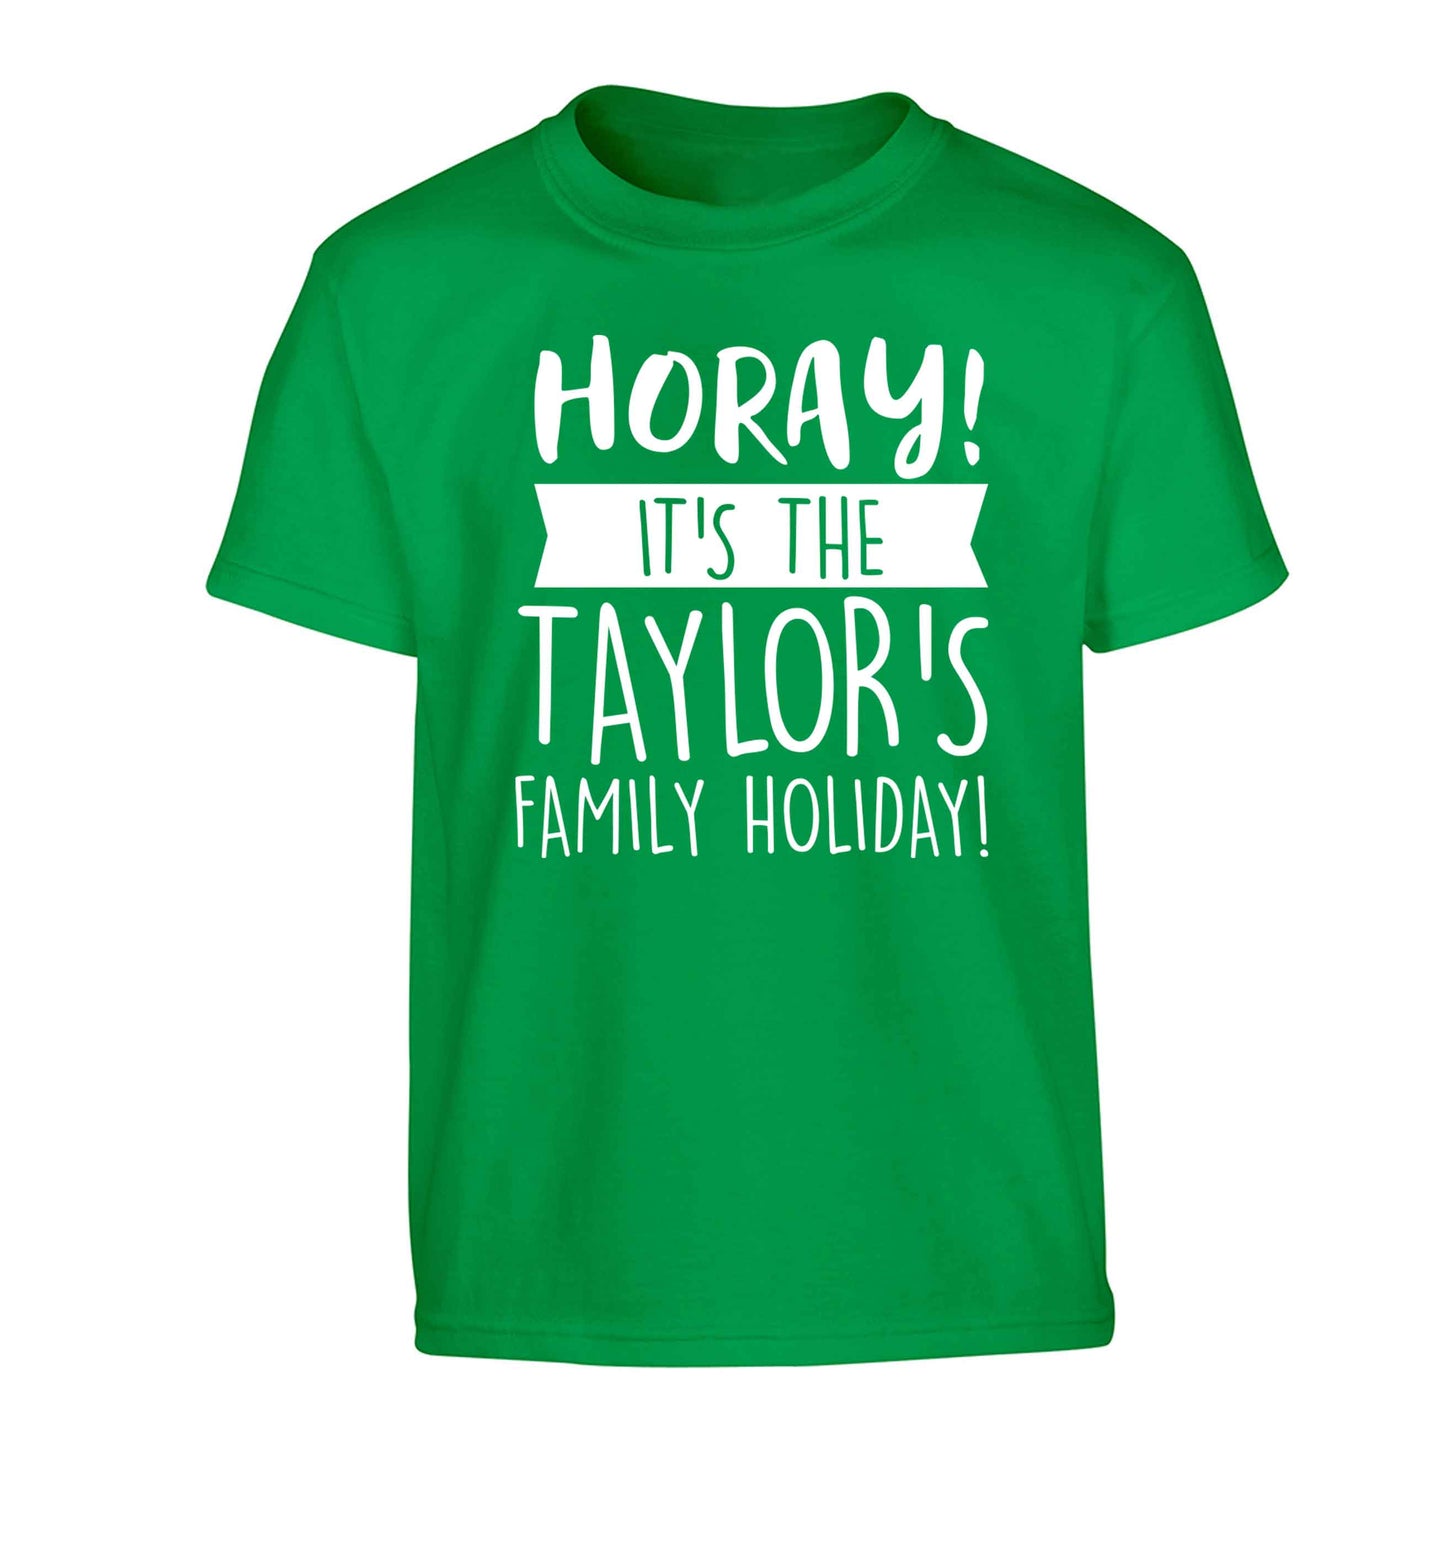 Horay it's the Taylor's family holiday! personalised item Children's green Tshirt 12-13 Years